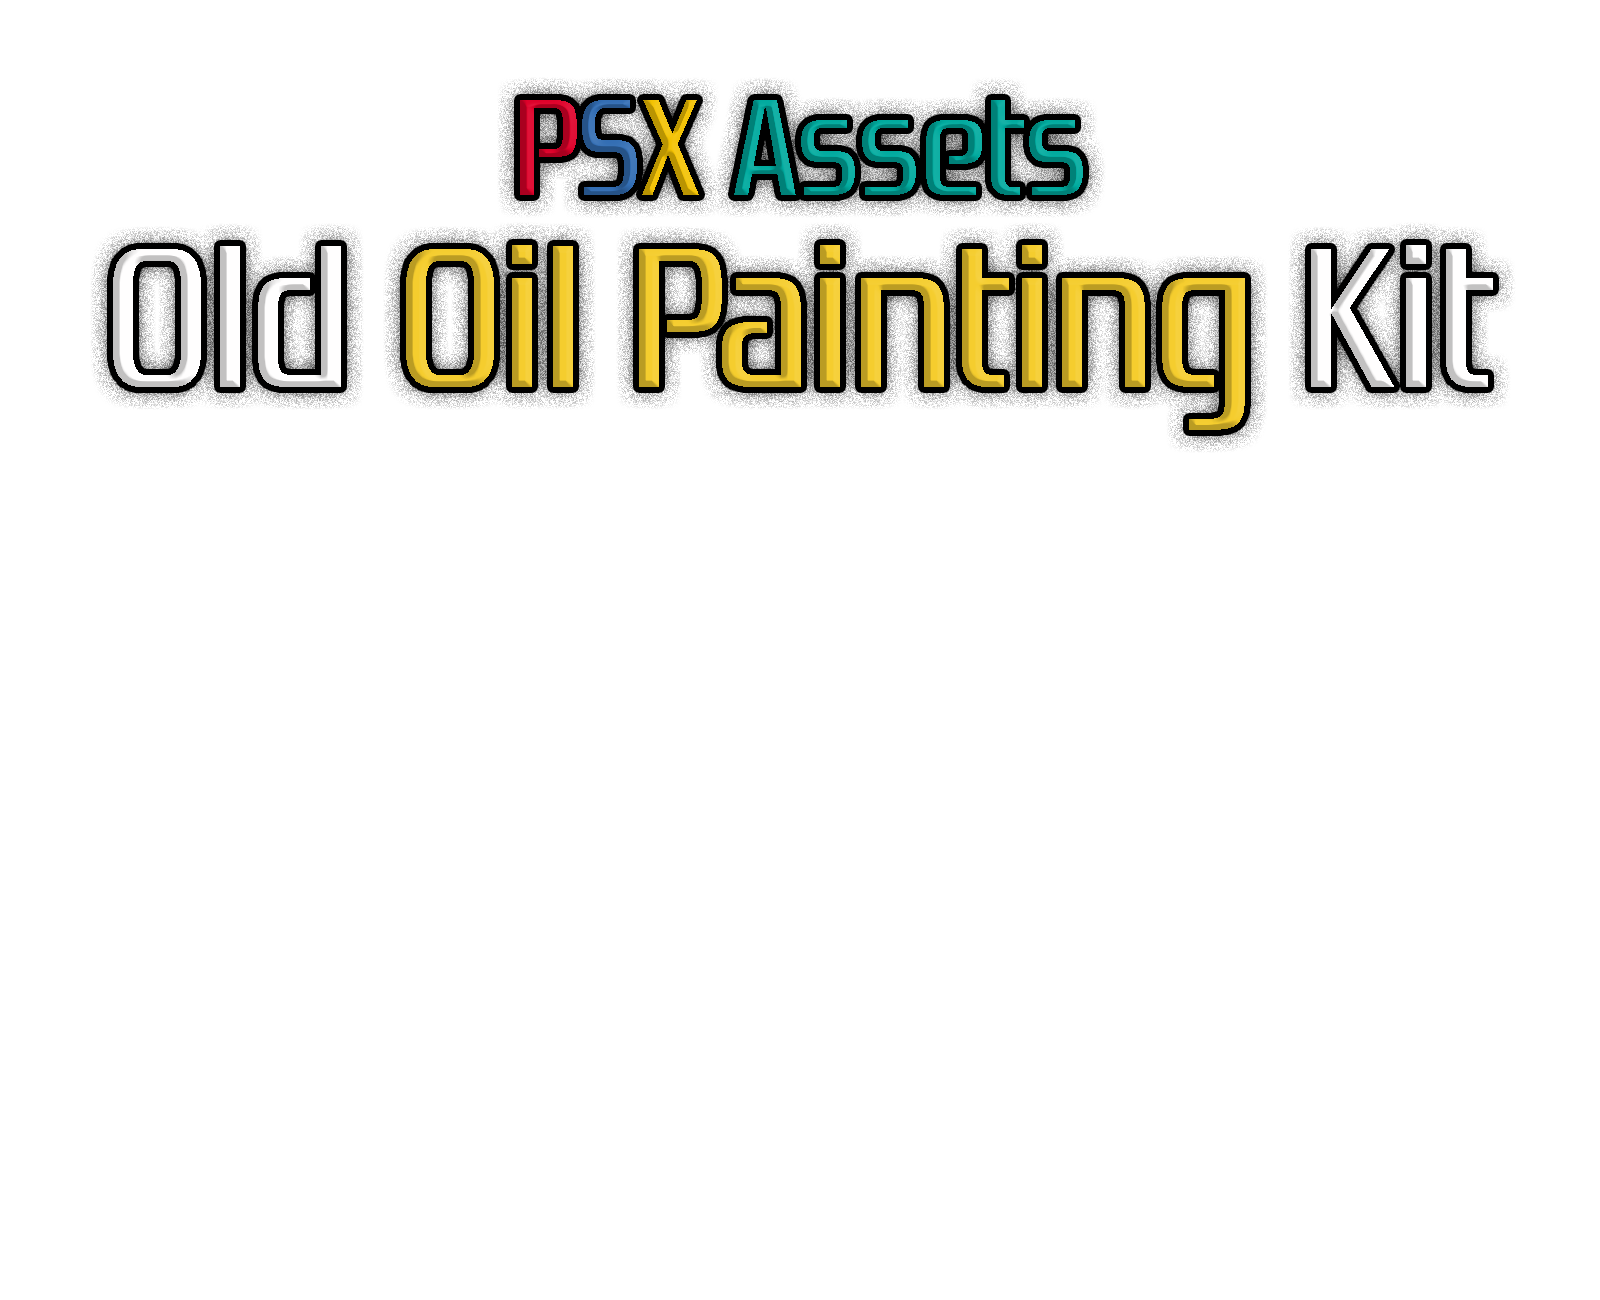 PSX Assets - Old Oil Painting Kit